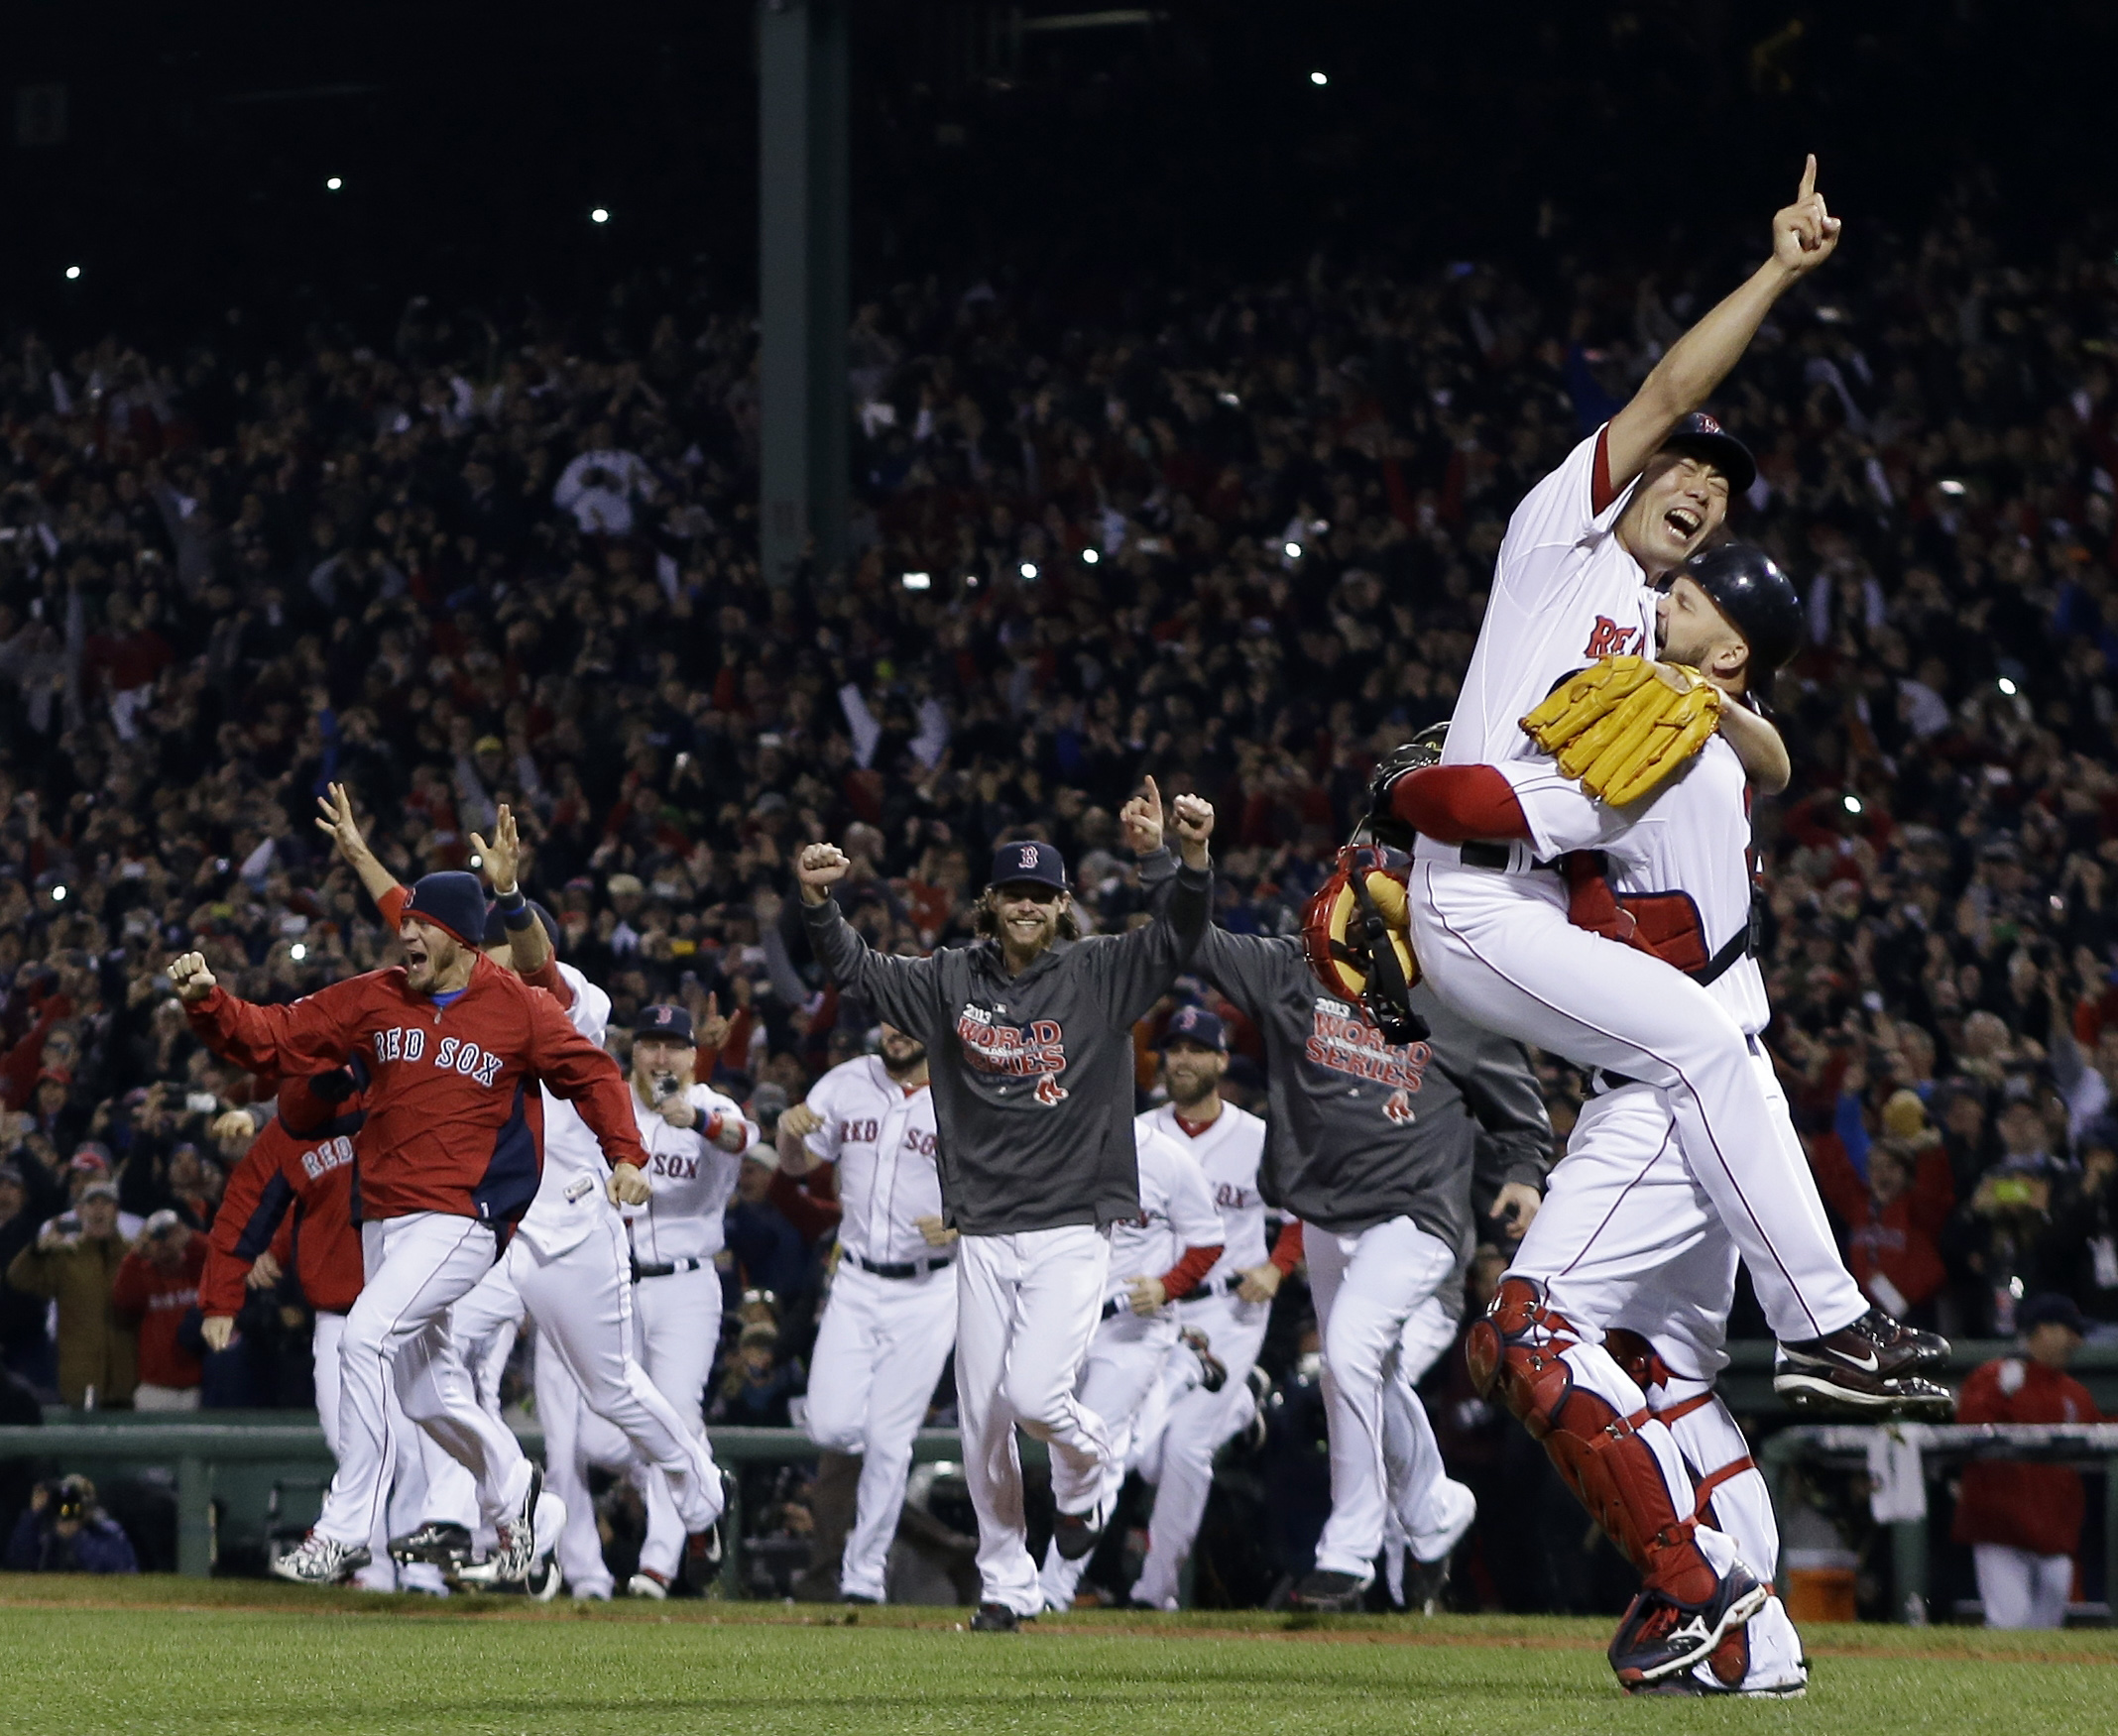 Image result for boston red sox win their first world series since 1918